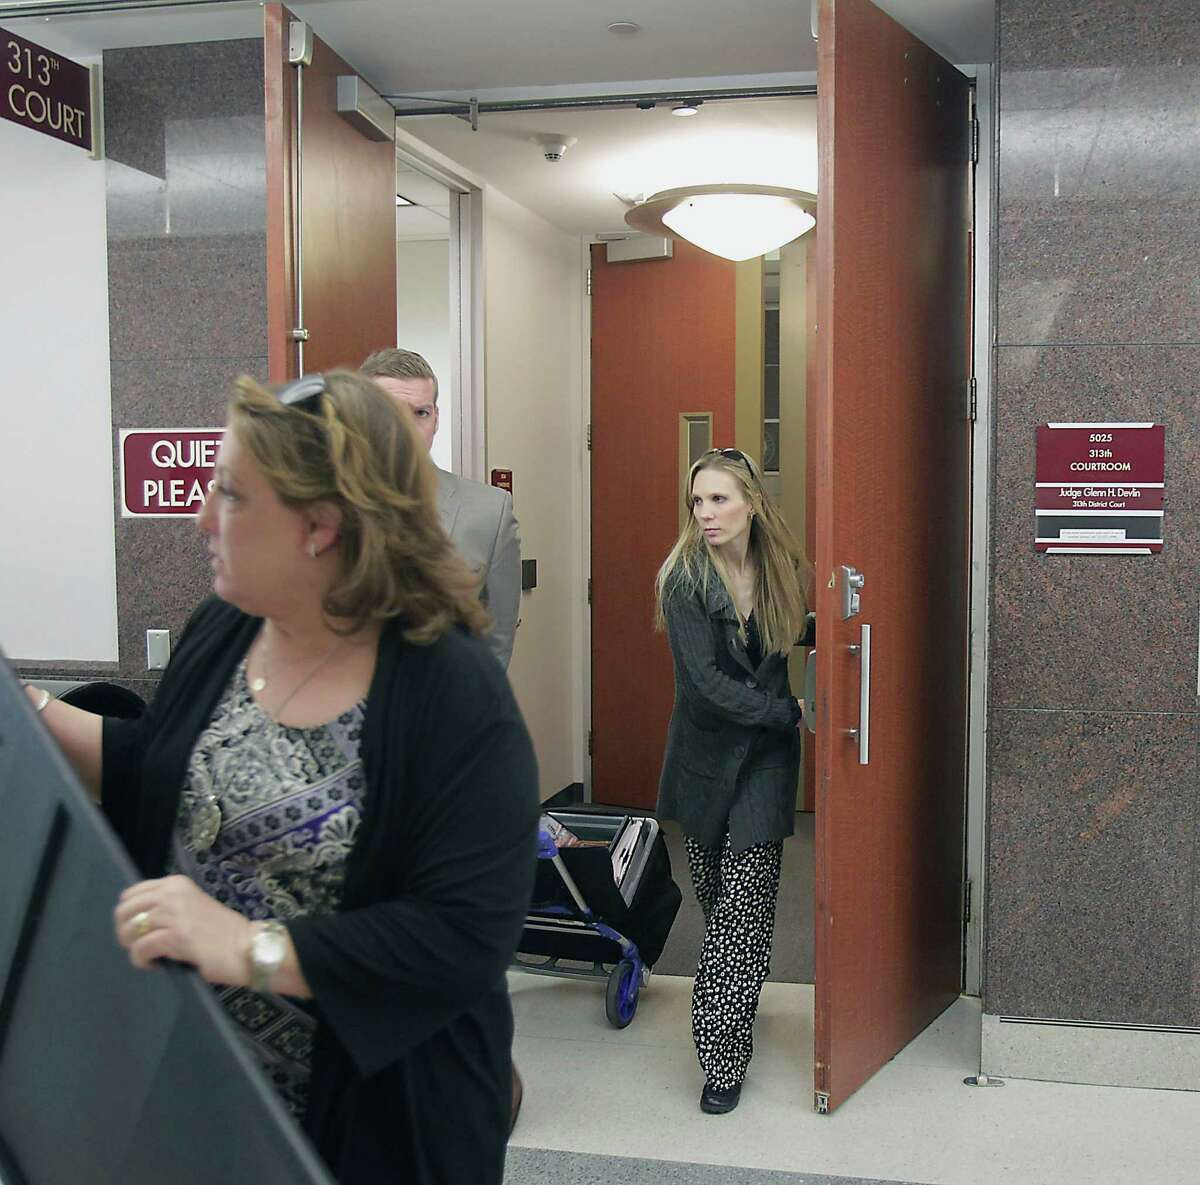 Tami Bleimeyer, right, leaves court Tuesday after a judge ruled that her six children should have no contact with her. She also testified that she is pregnant, with a baby due in August.